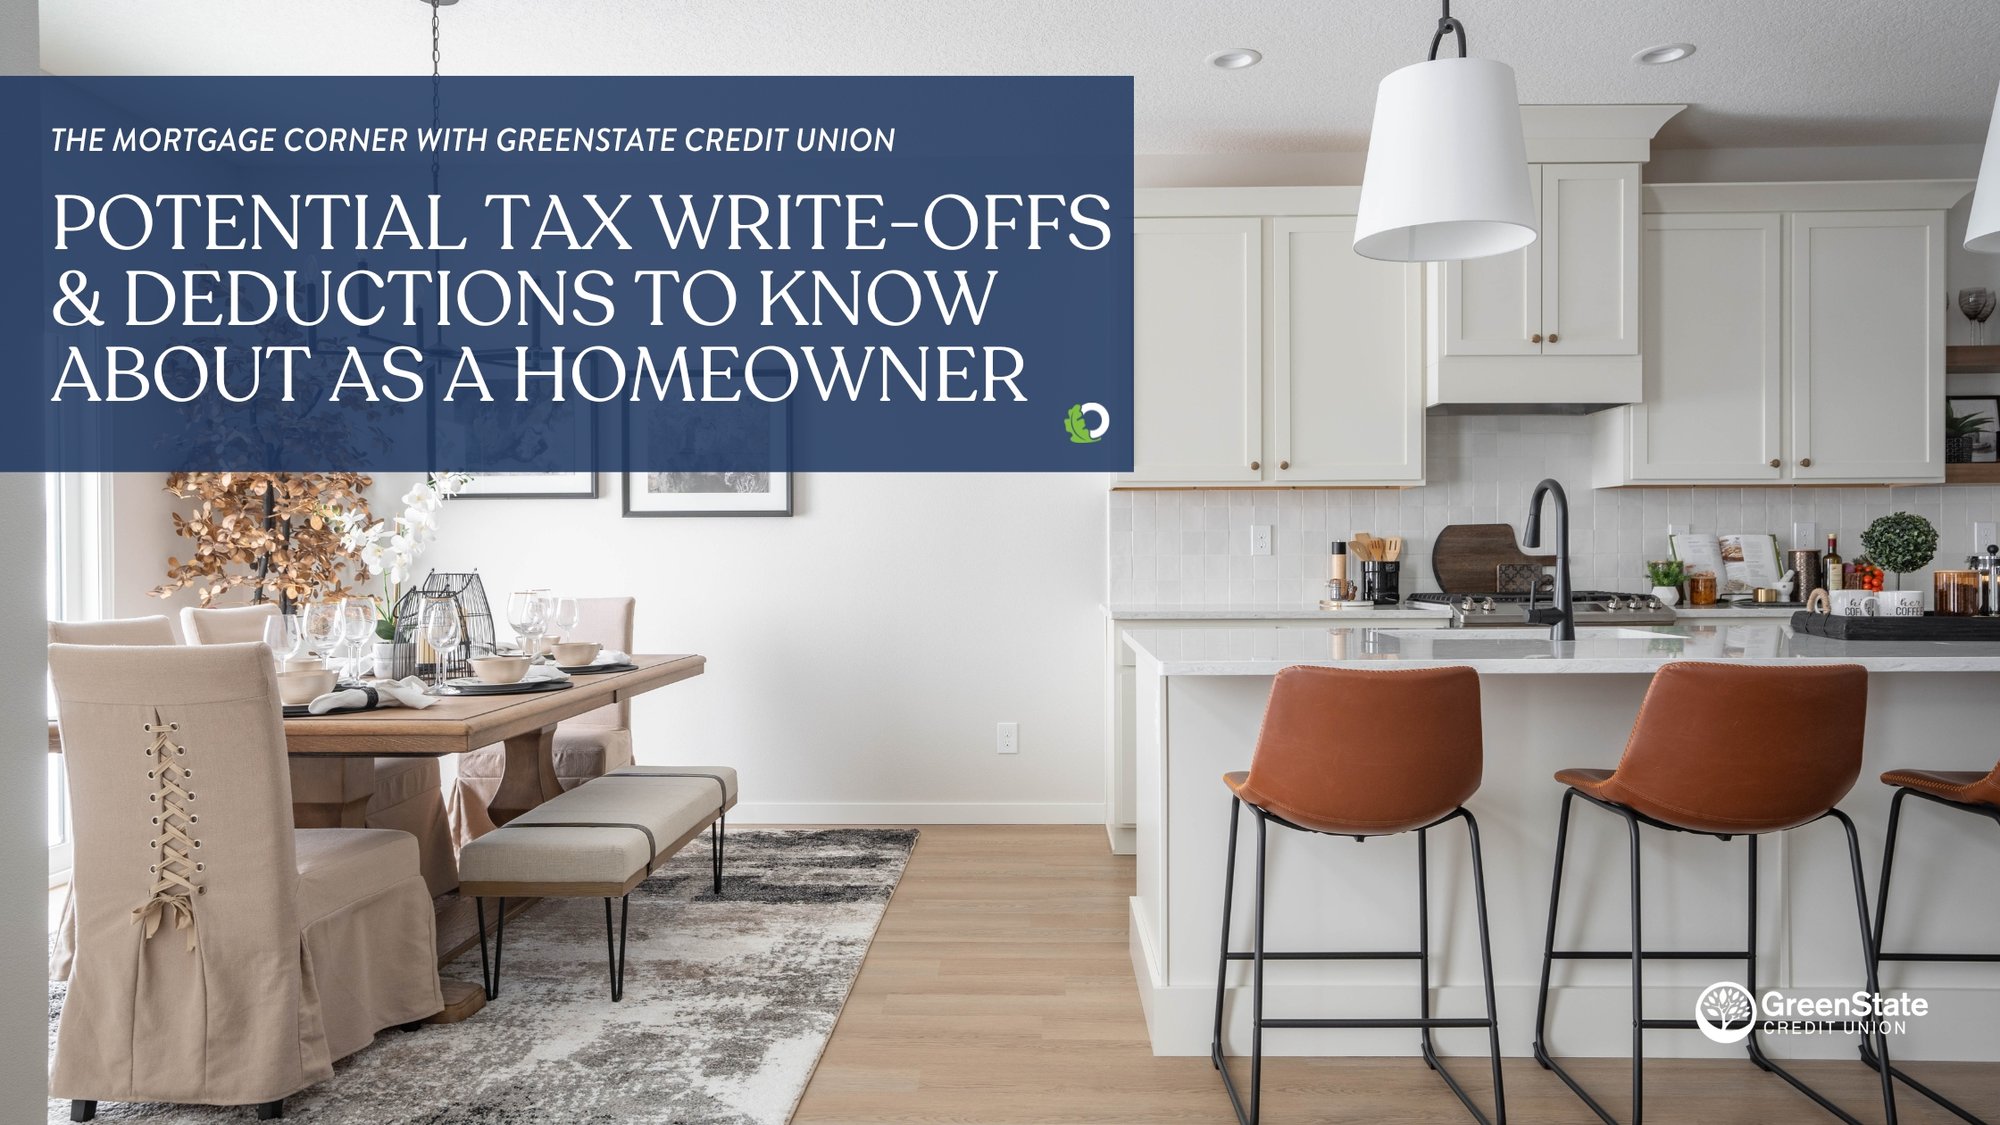 Potential Tax Write-Offs & deductions to Know About as a Homeowner